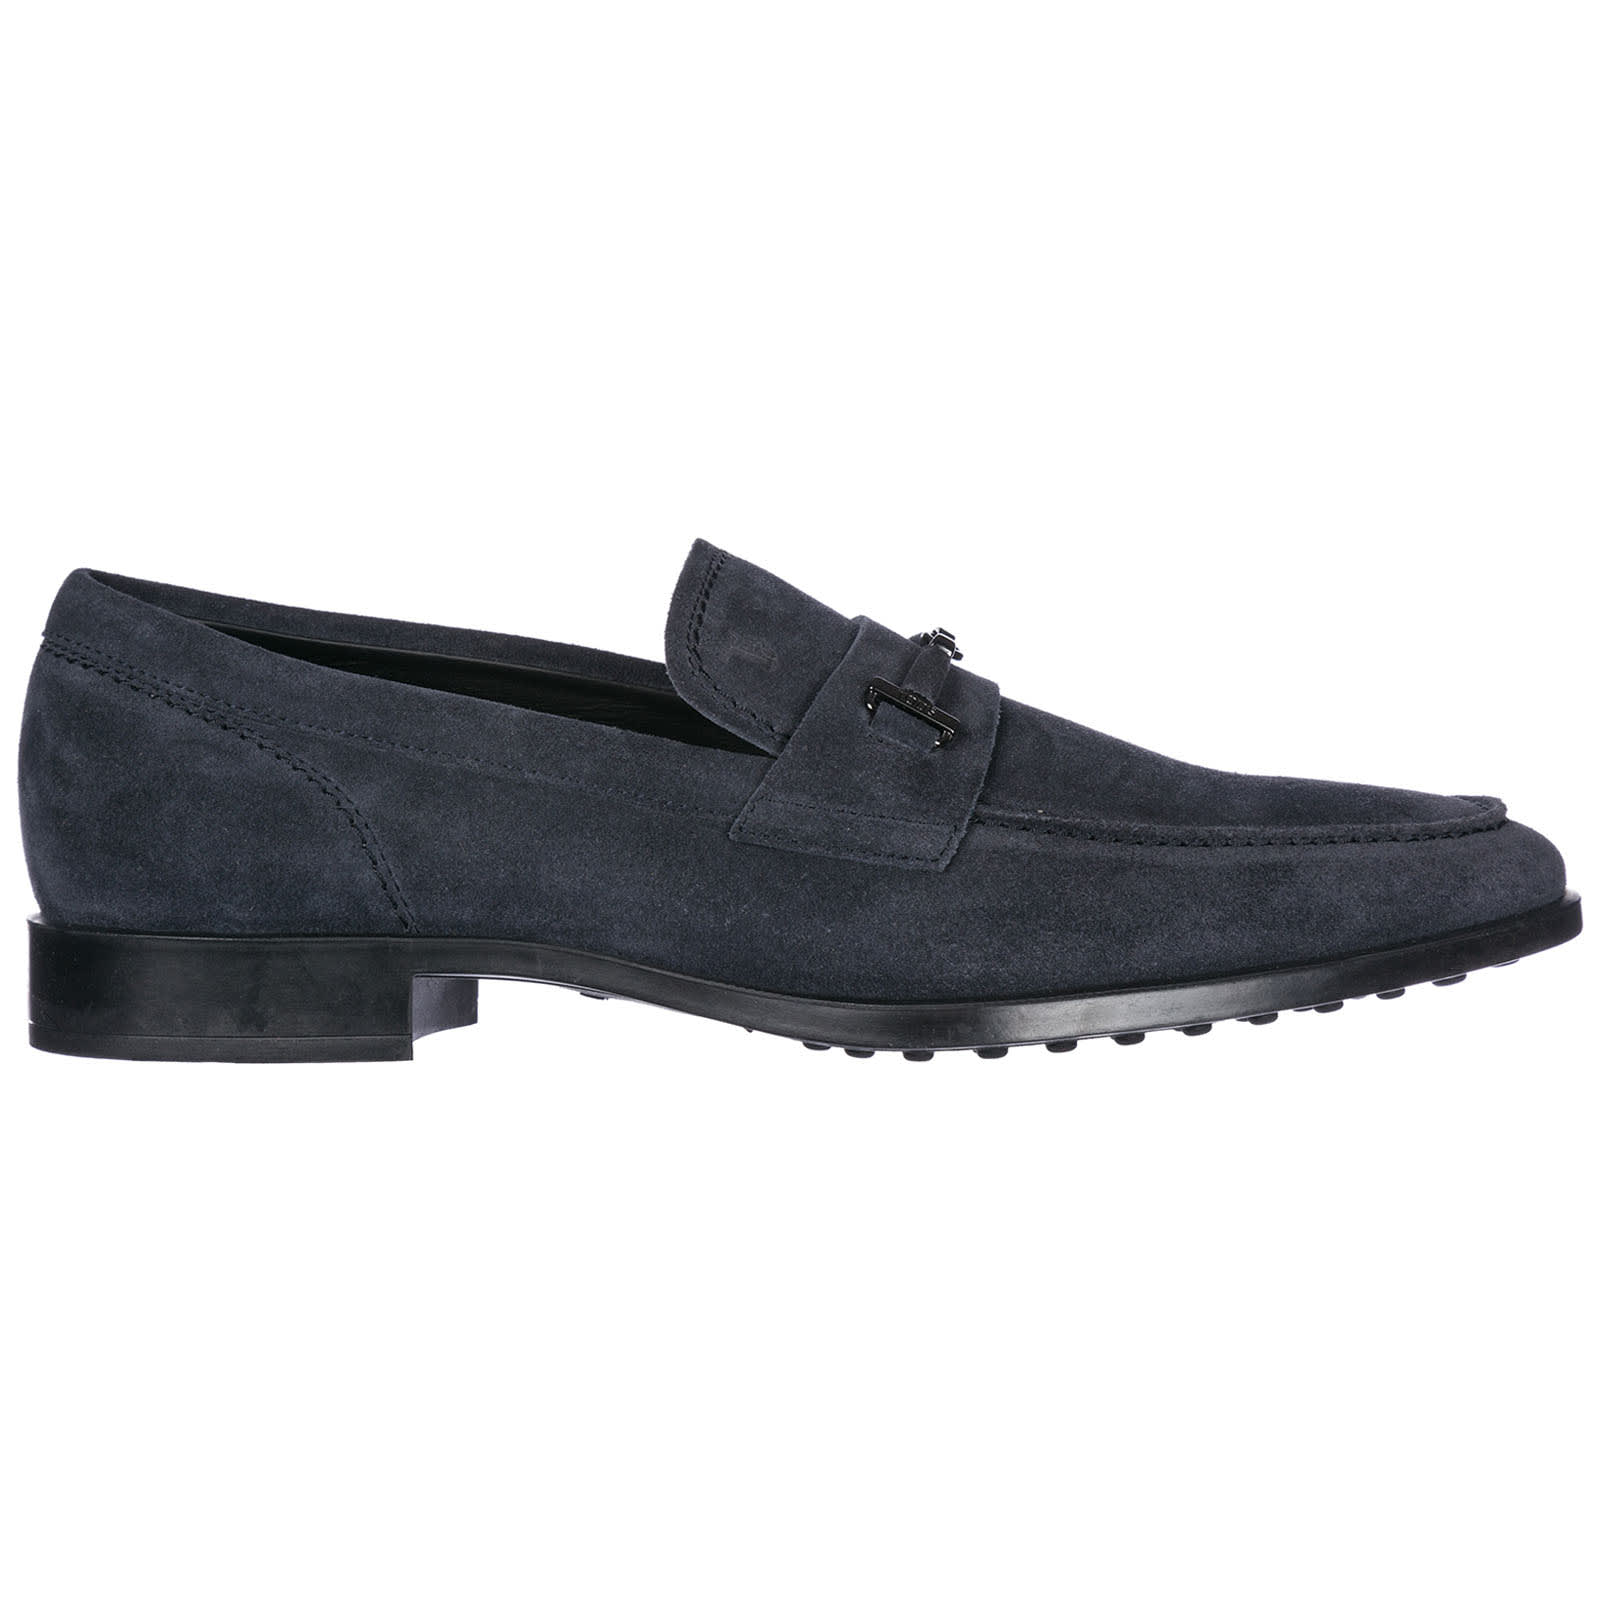 Tods Wellington Tall Moccasins